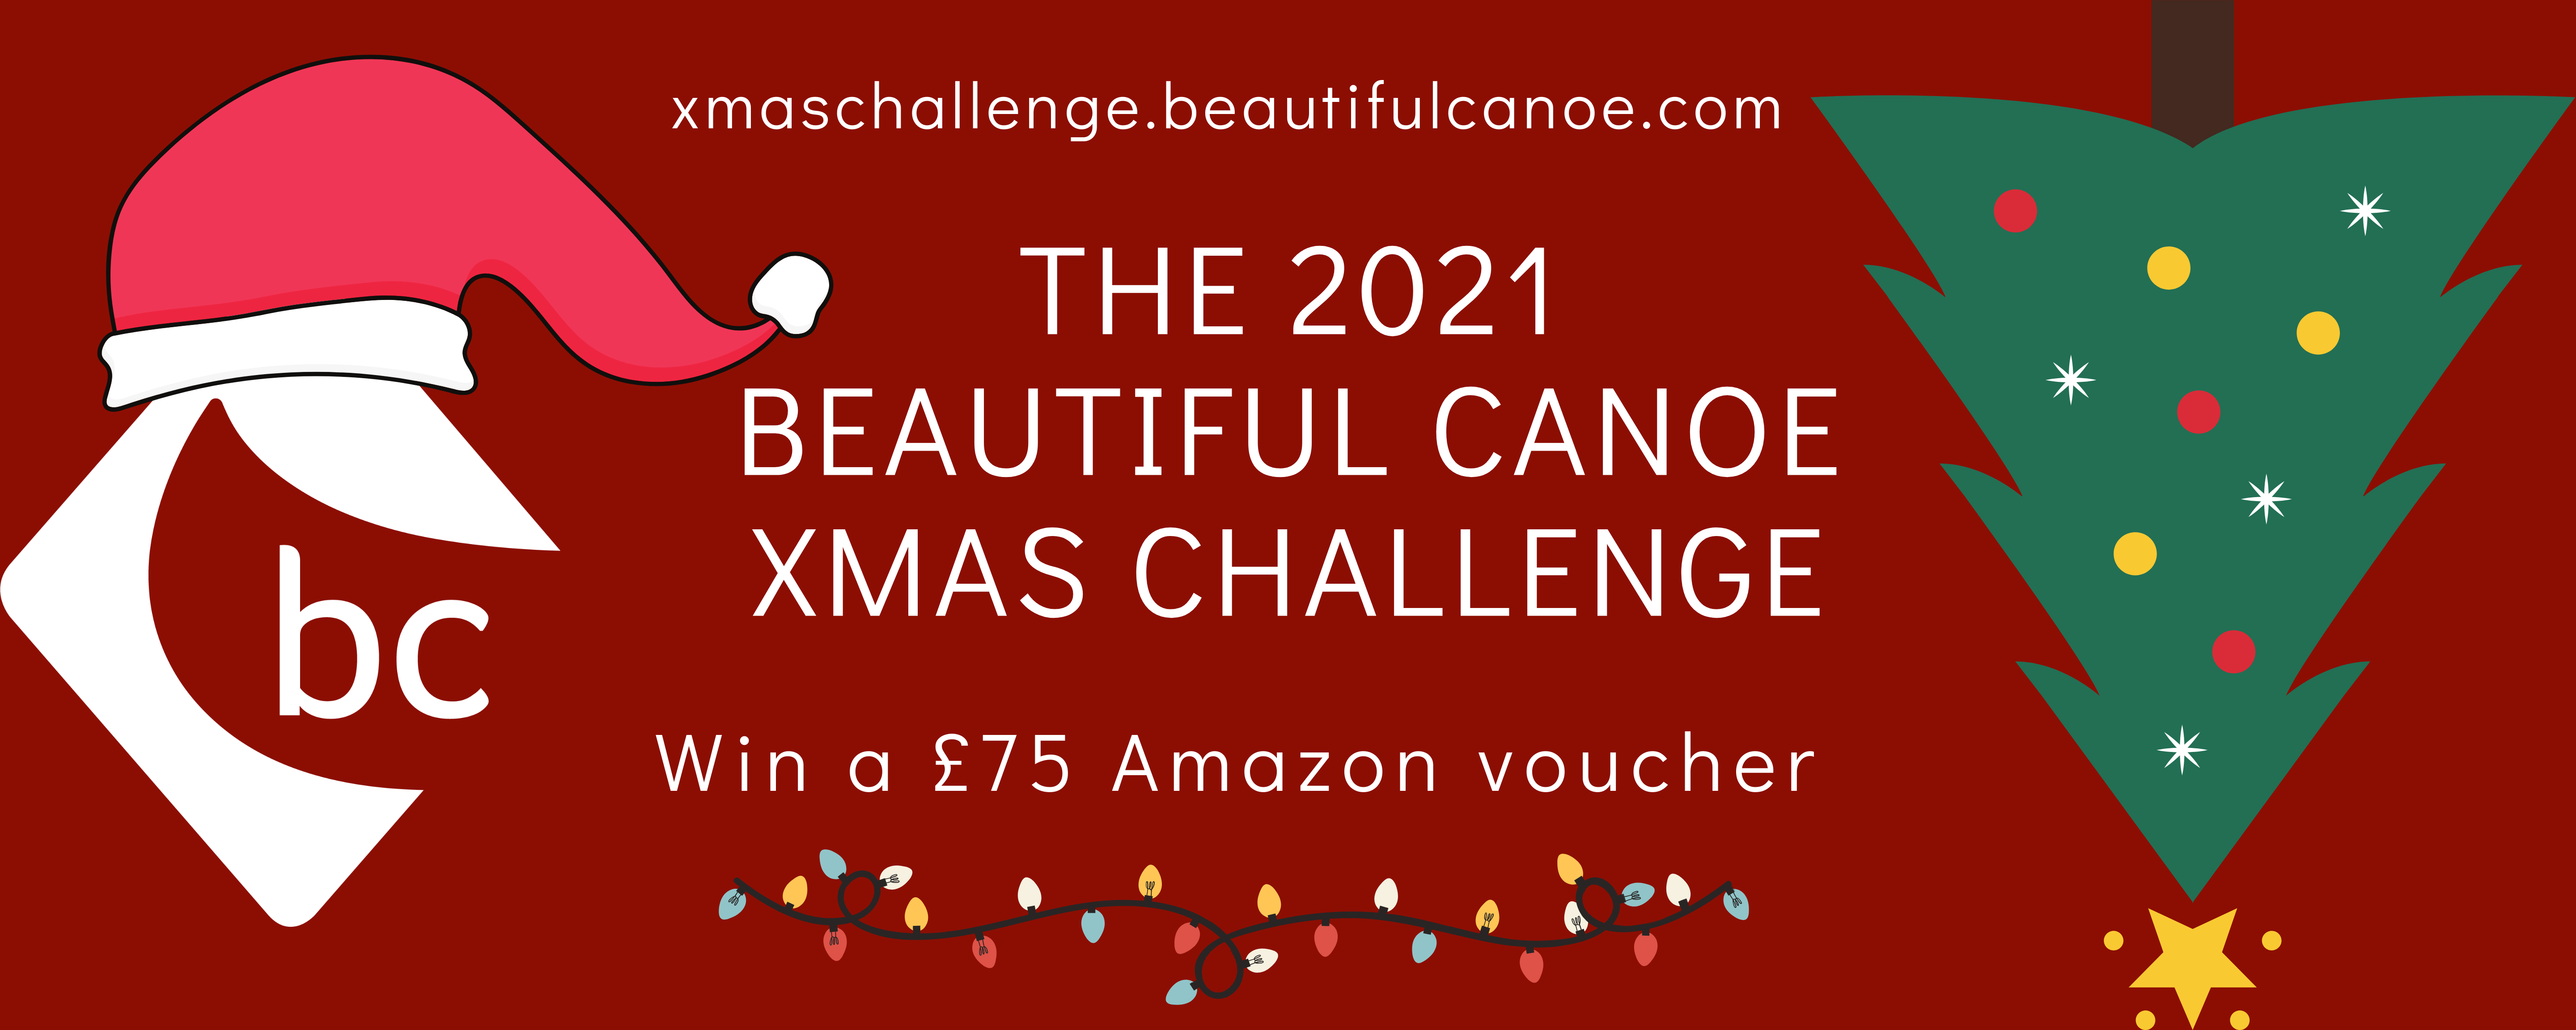 Win a £75 Amazon voucher this Christmas!